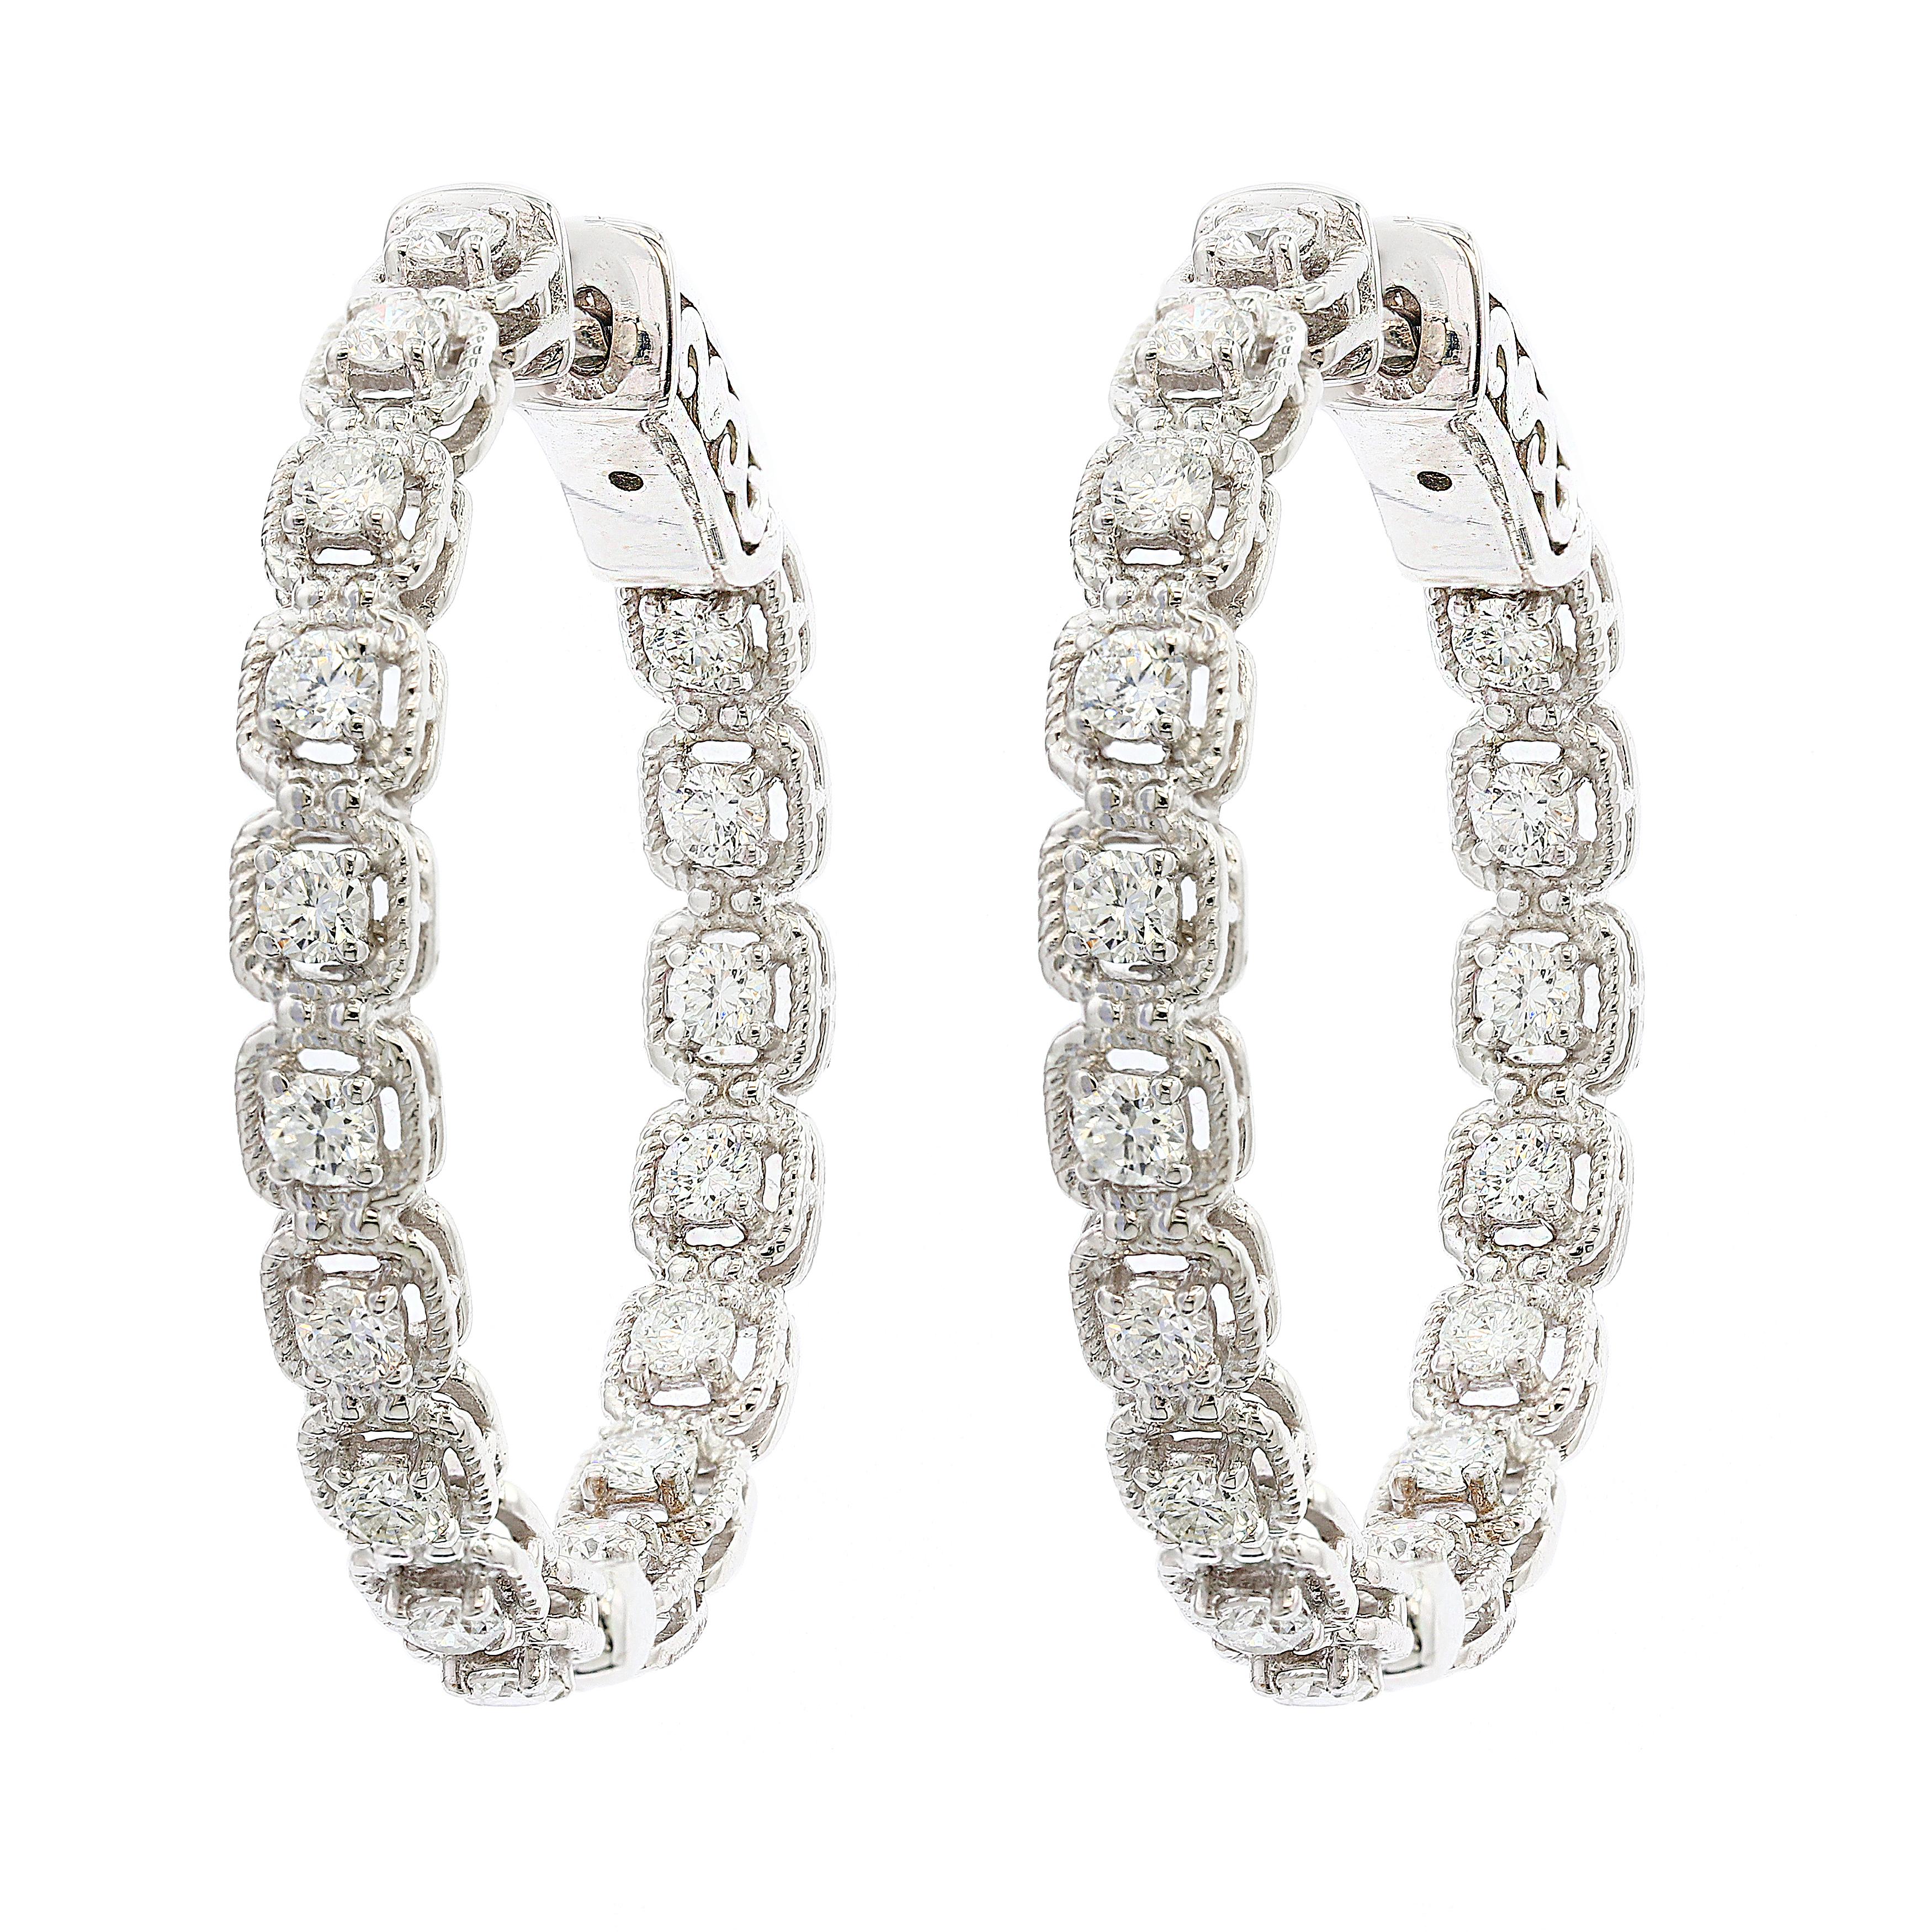 Showcasing a row of round brilliant diamonds, set in a stylish hoop design. With this design, it will sit comfortably and perfectly on the ear. Made in 14k white gold. 34 Diamonds weigh 1.04 carats total.
Hoop Earrings are 1 inch approx.
 
All